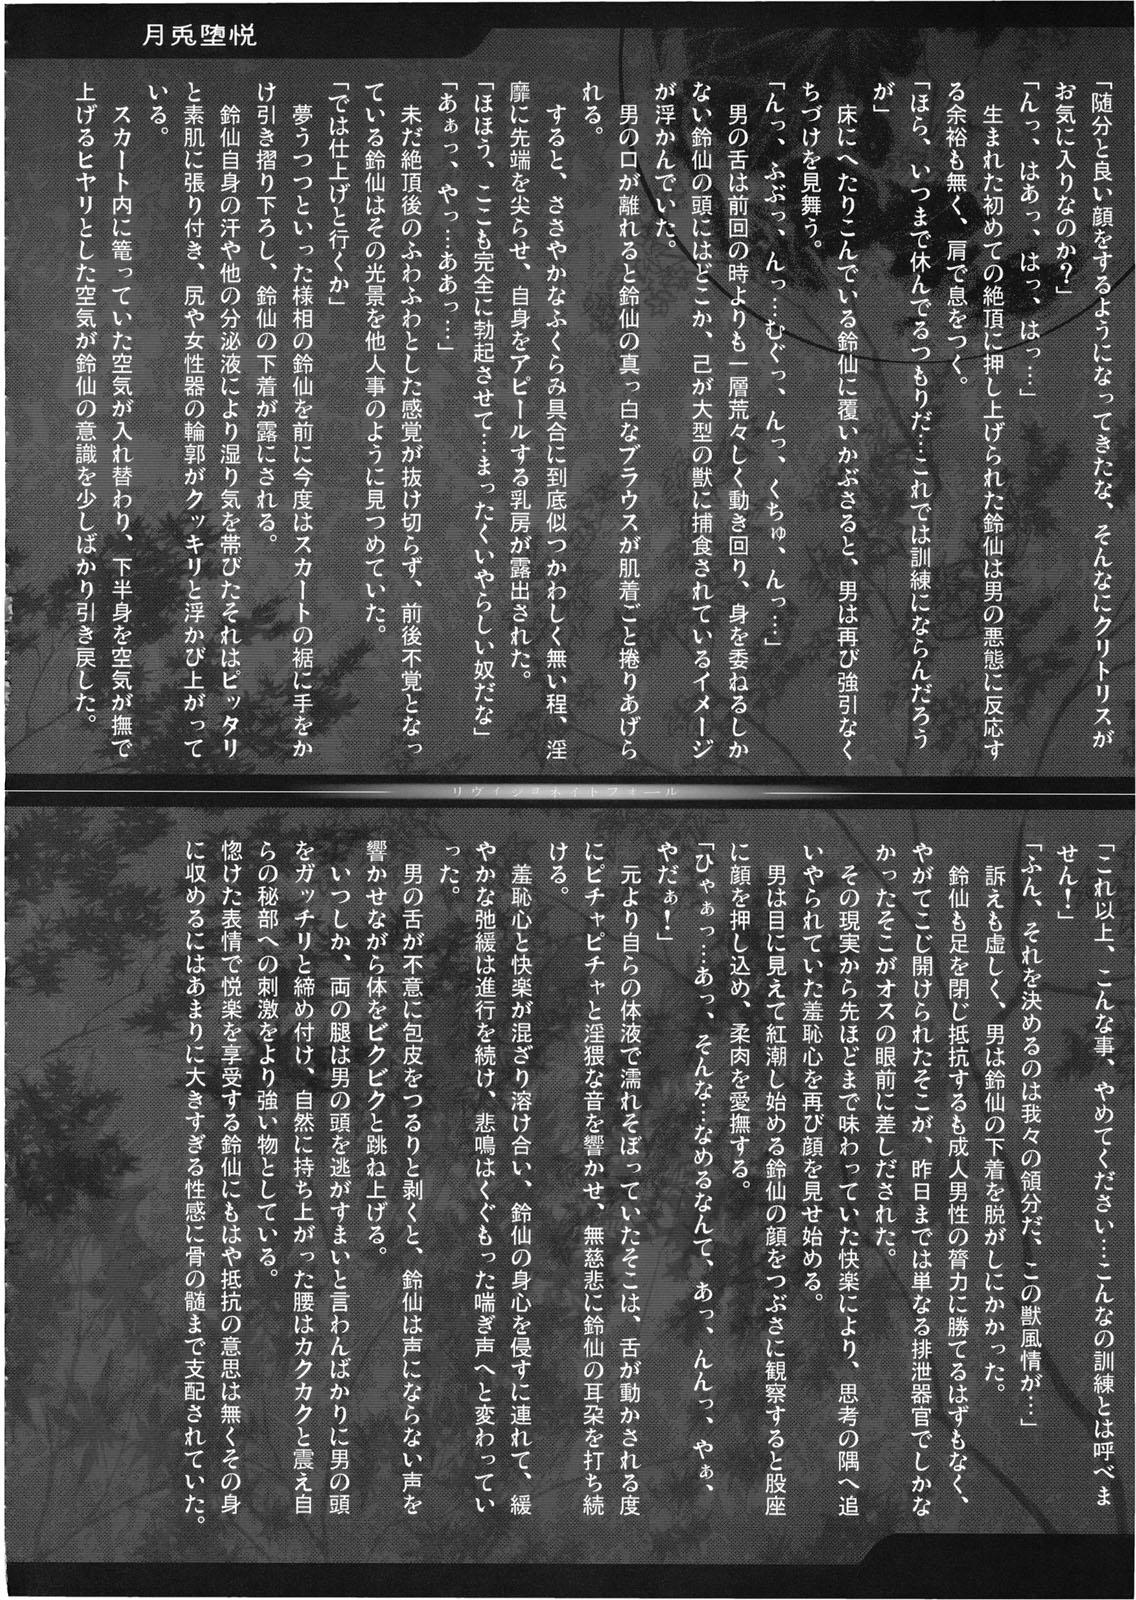 Tied 幻想郷 爆!! - Touhou project Two - Page 8